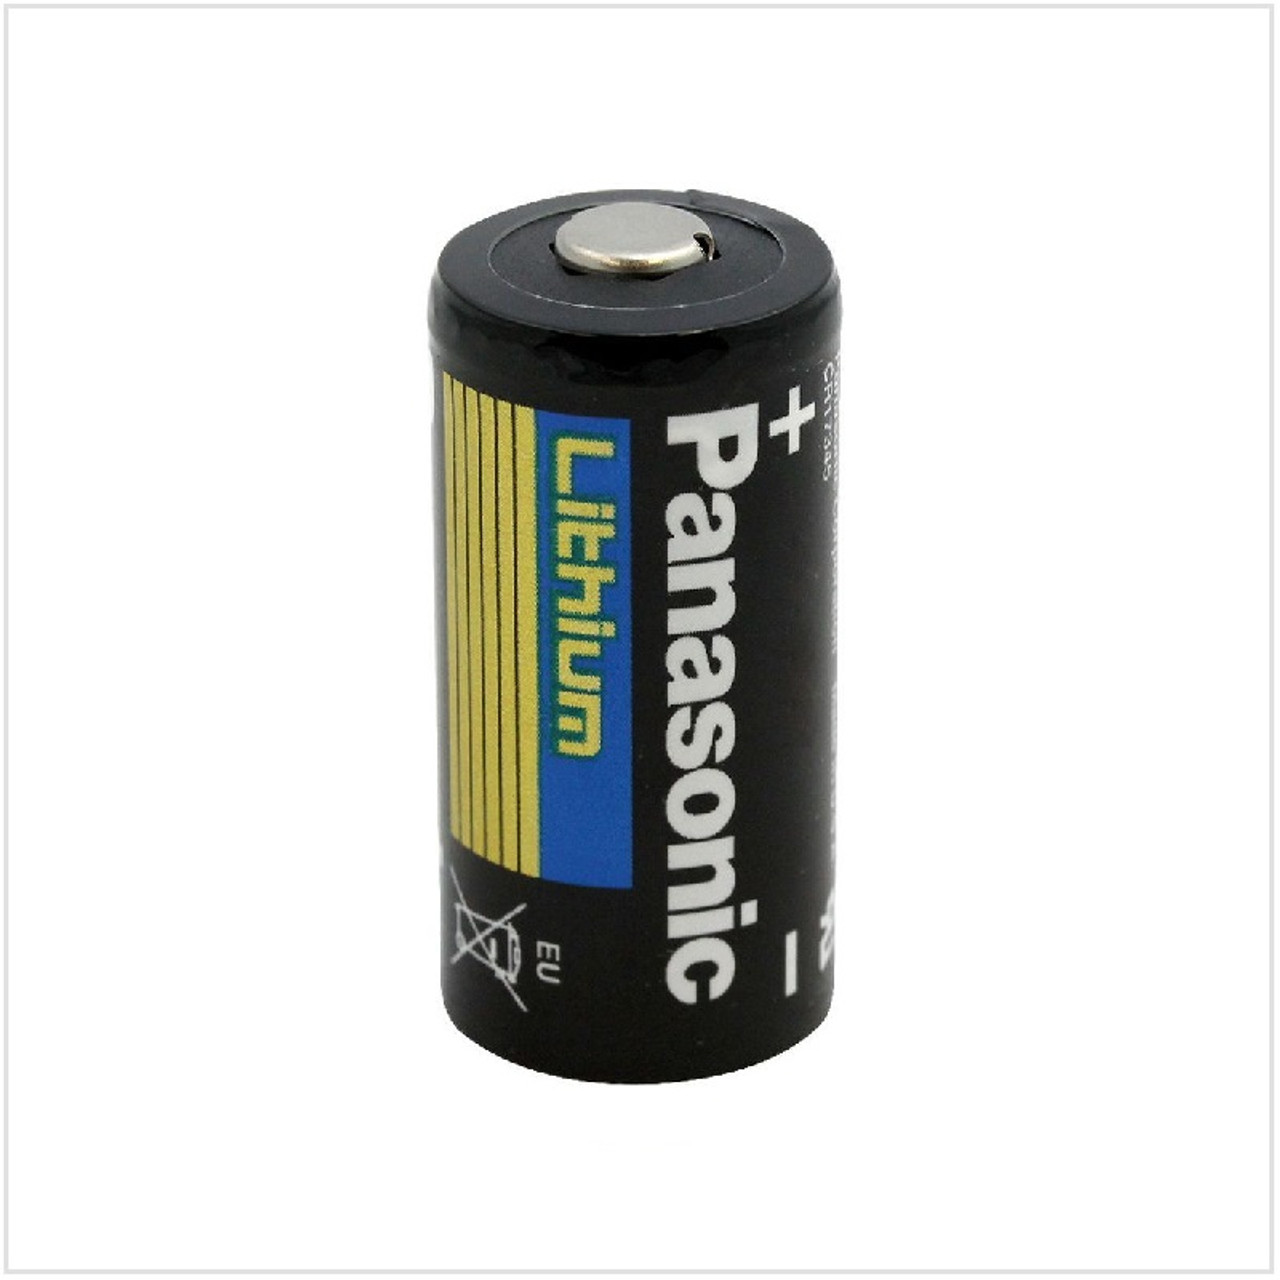 CR123A - Lithium Batteries - Primary Batteries - Panasonic